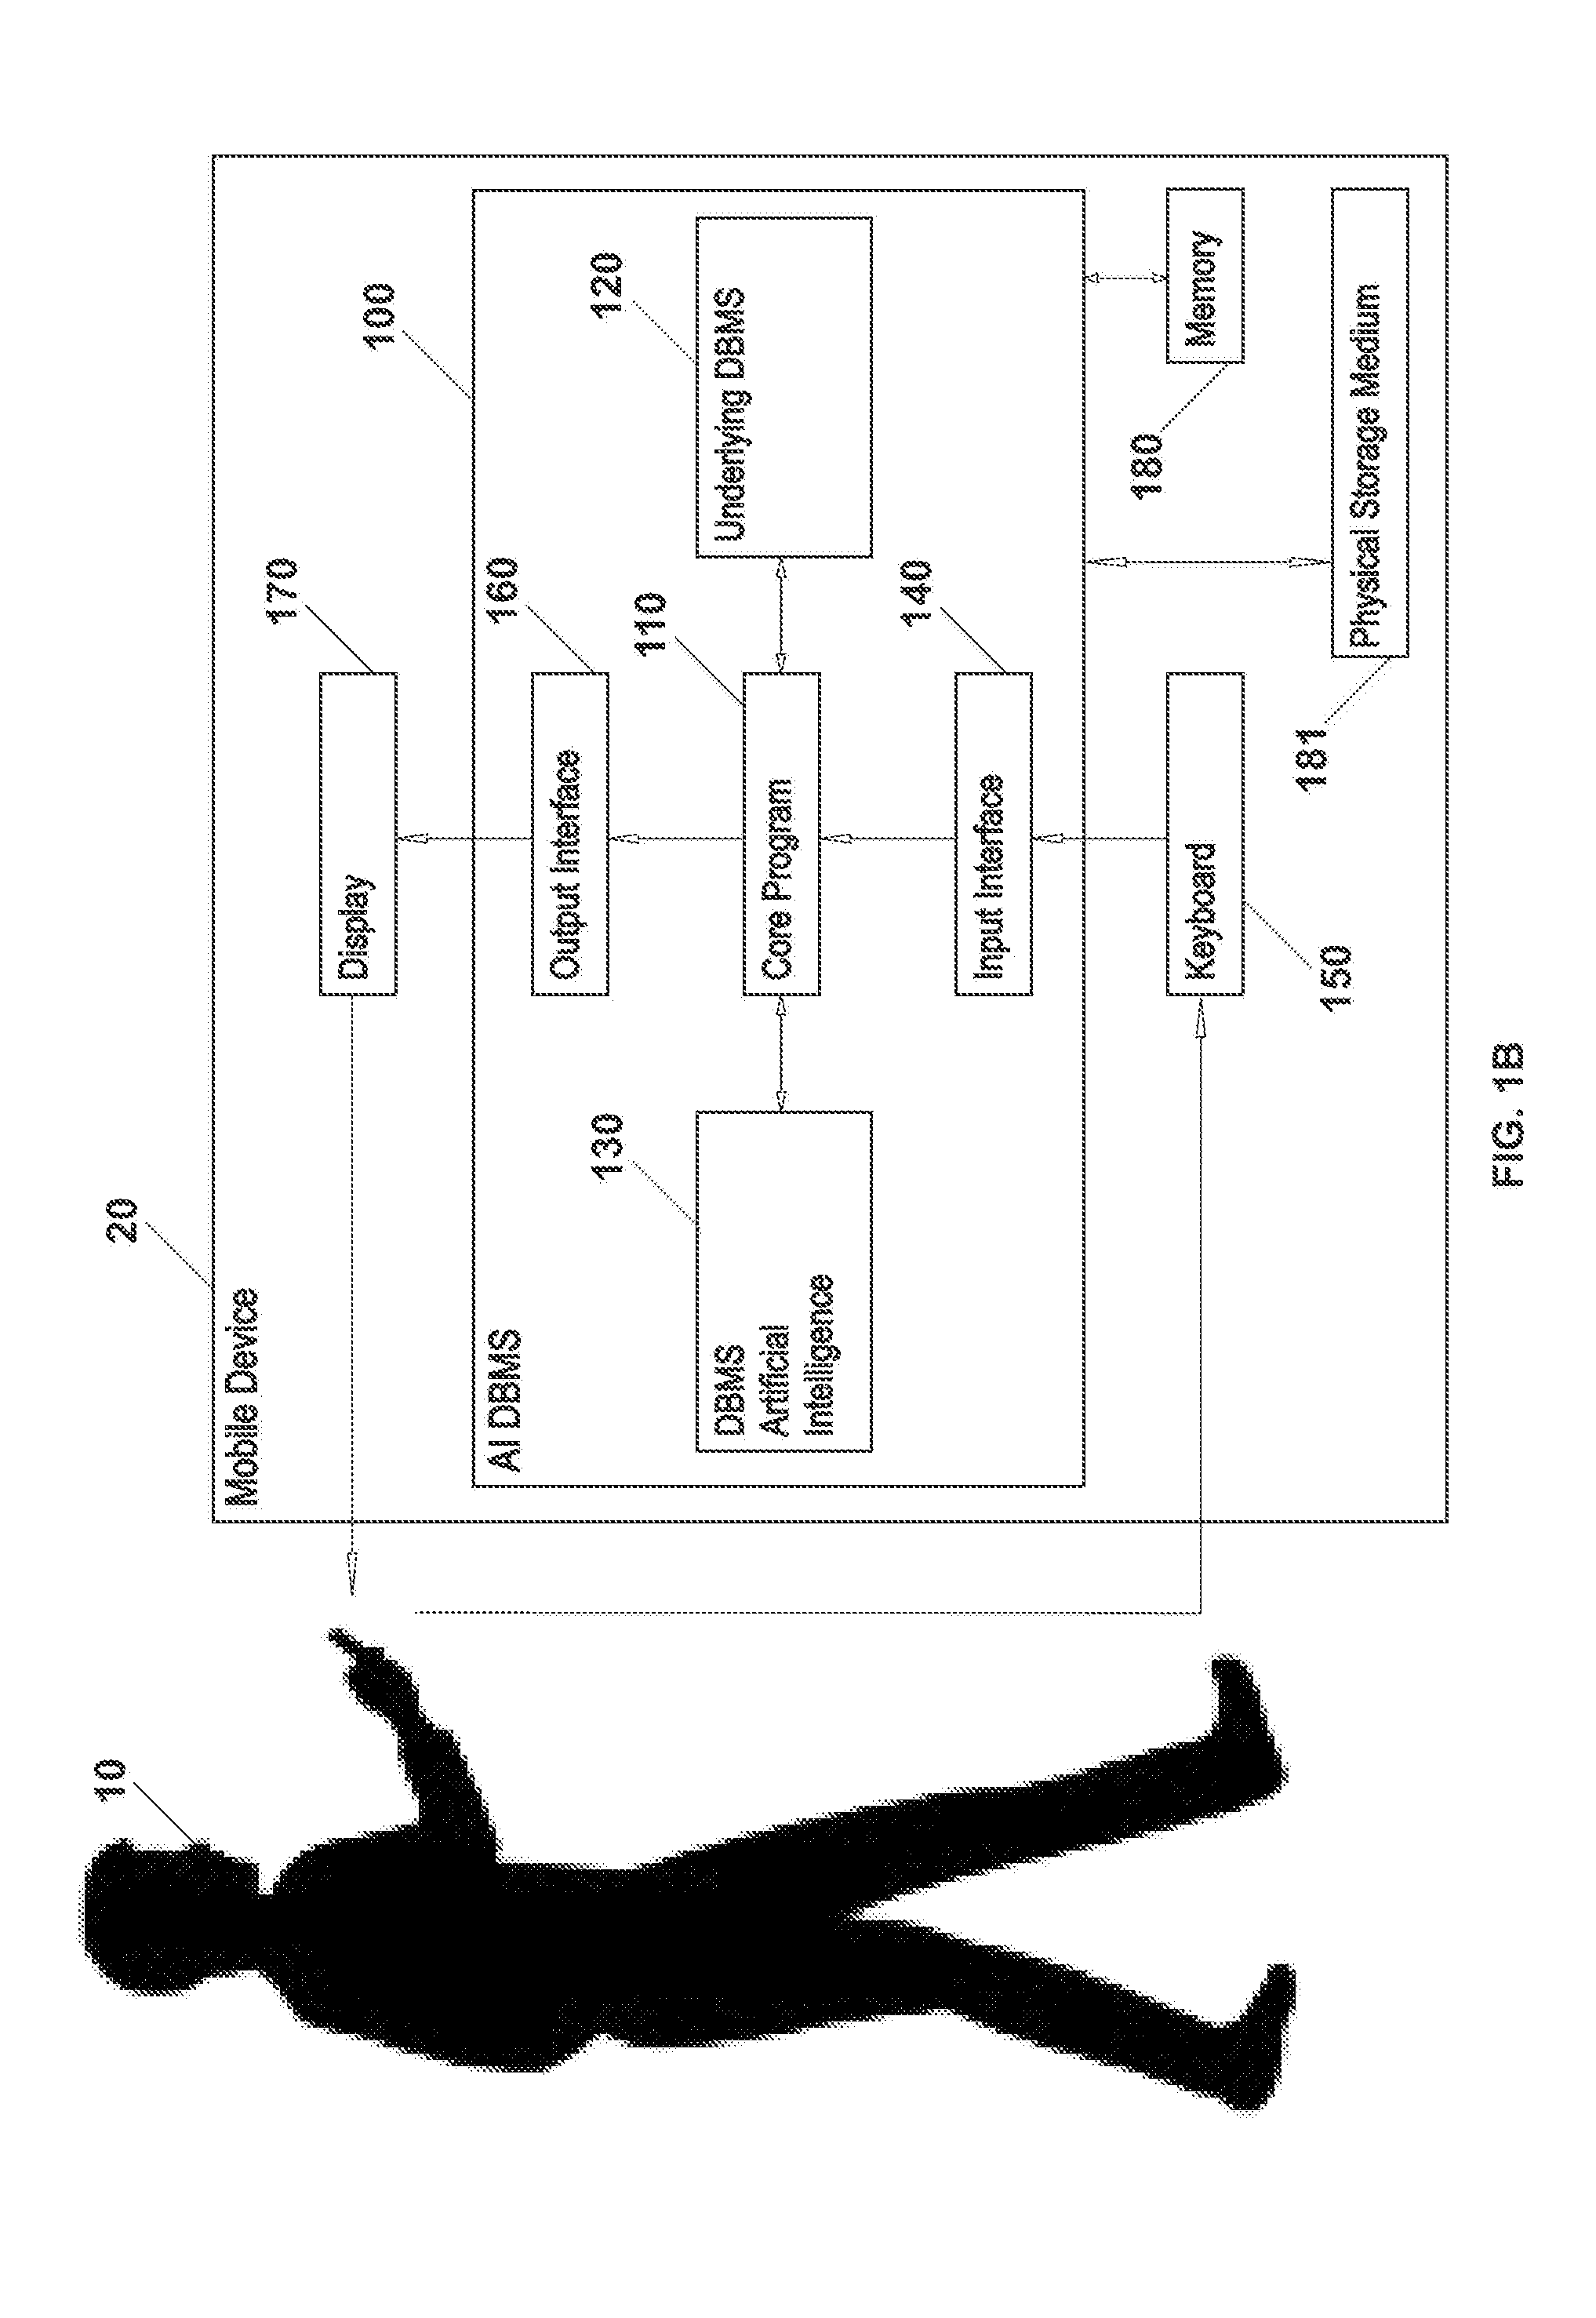 Systems and methods of using an artificially intelligent database management system and interfaces for mobile, embedded, and other computing devices